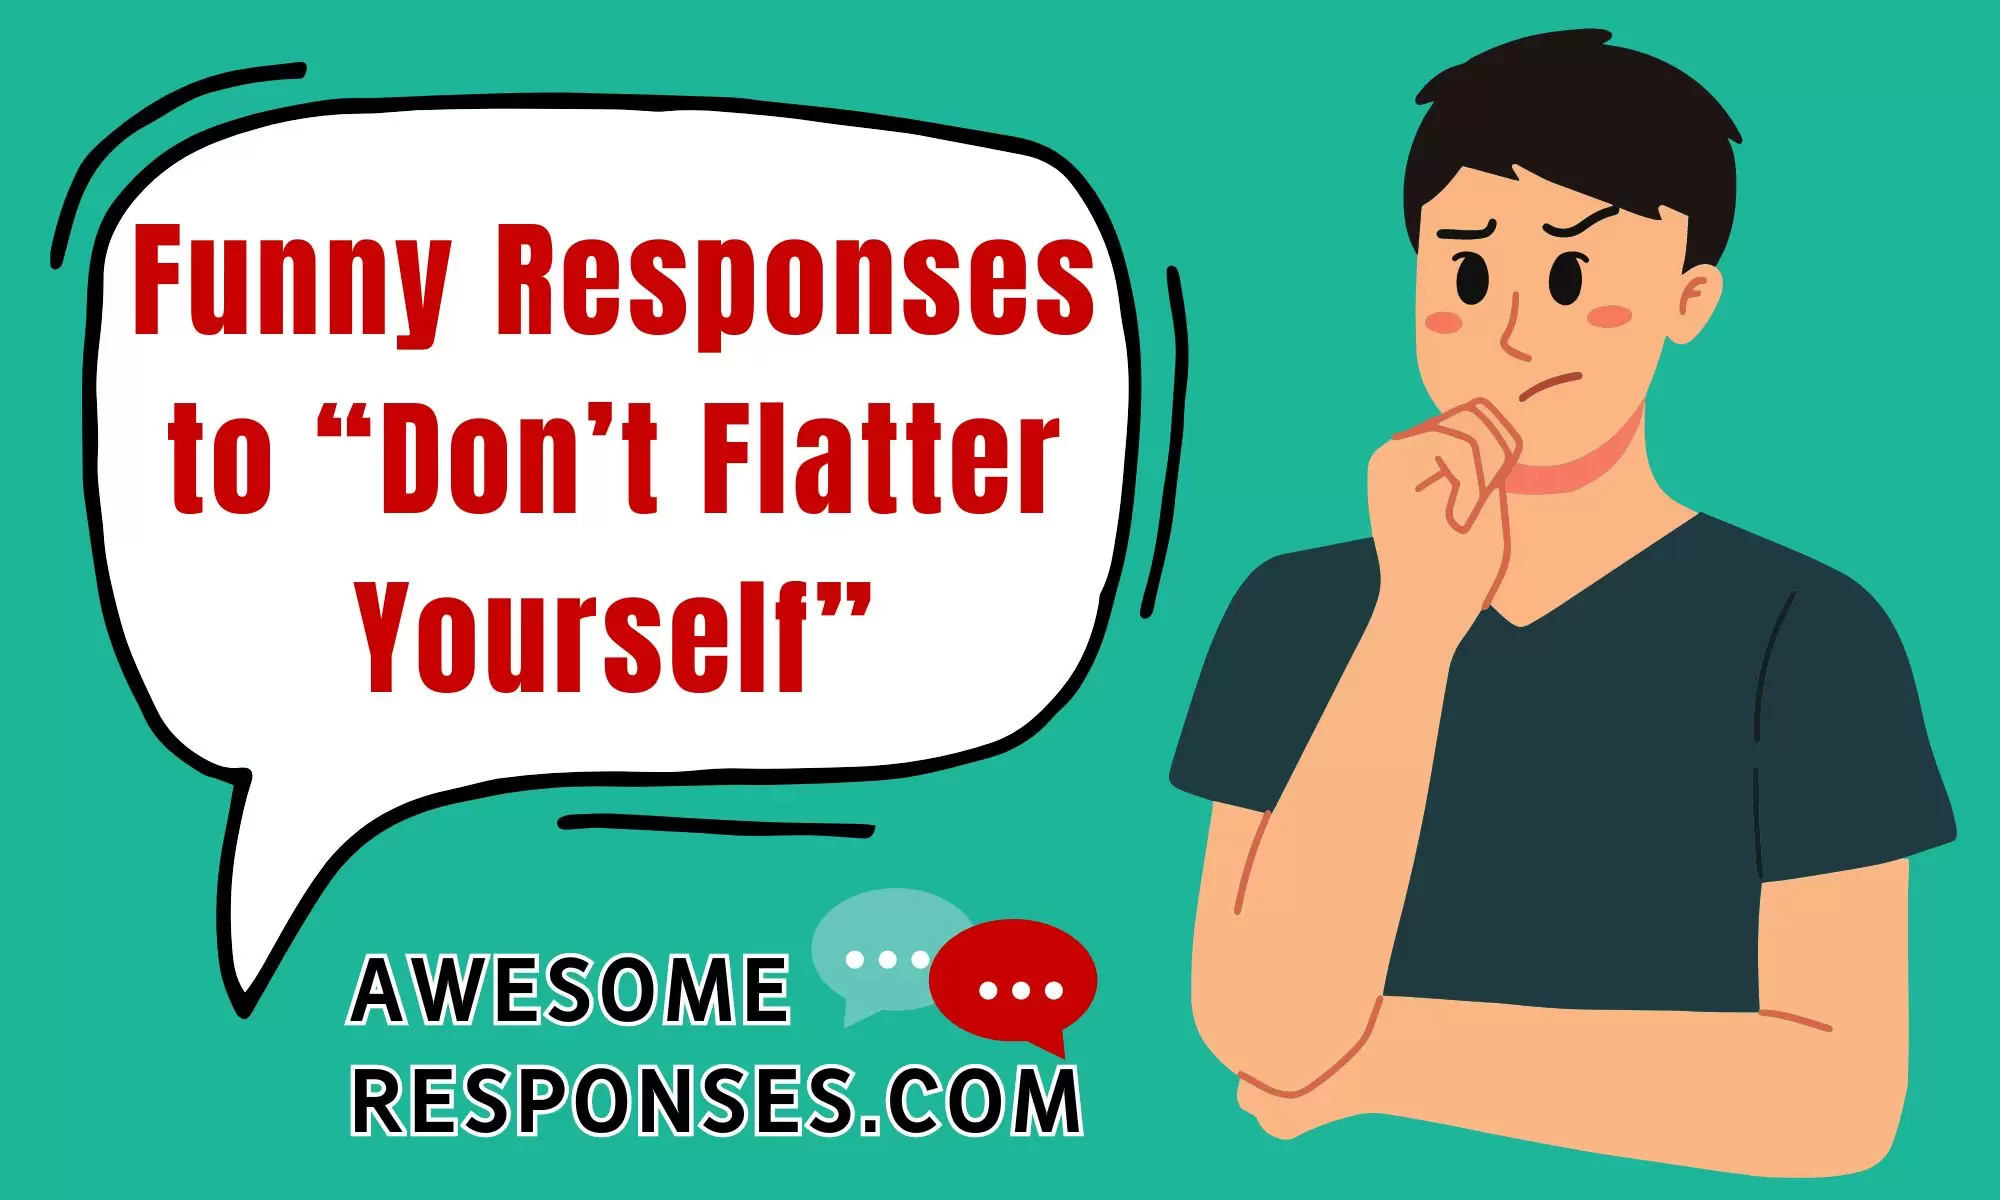 Funny Responses to “Don’t Flatter Yourself”